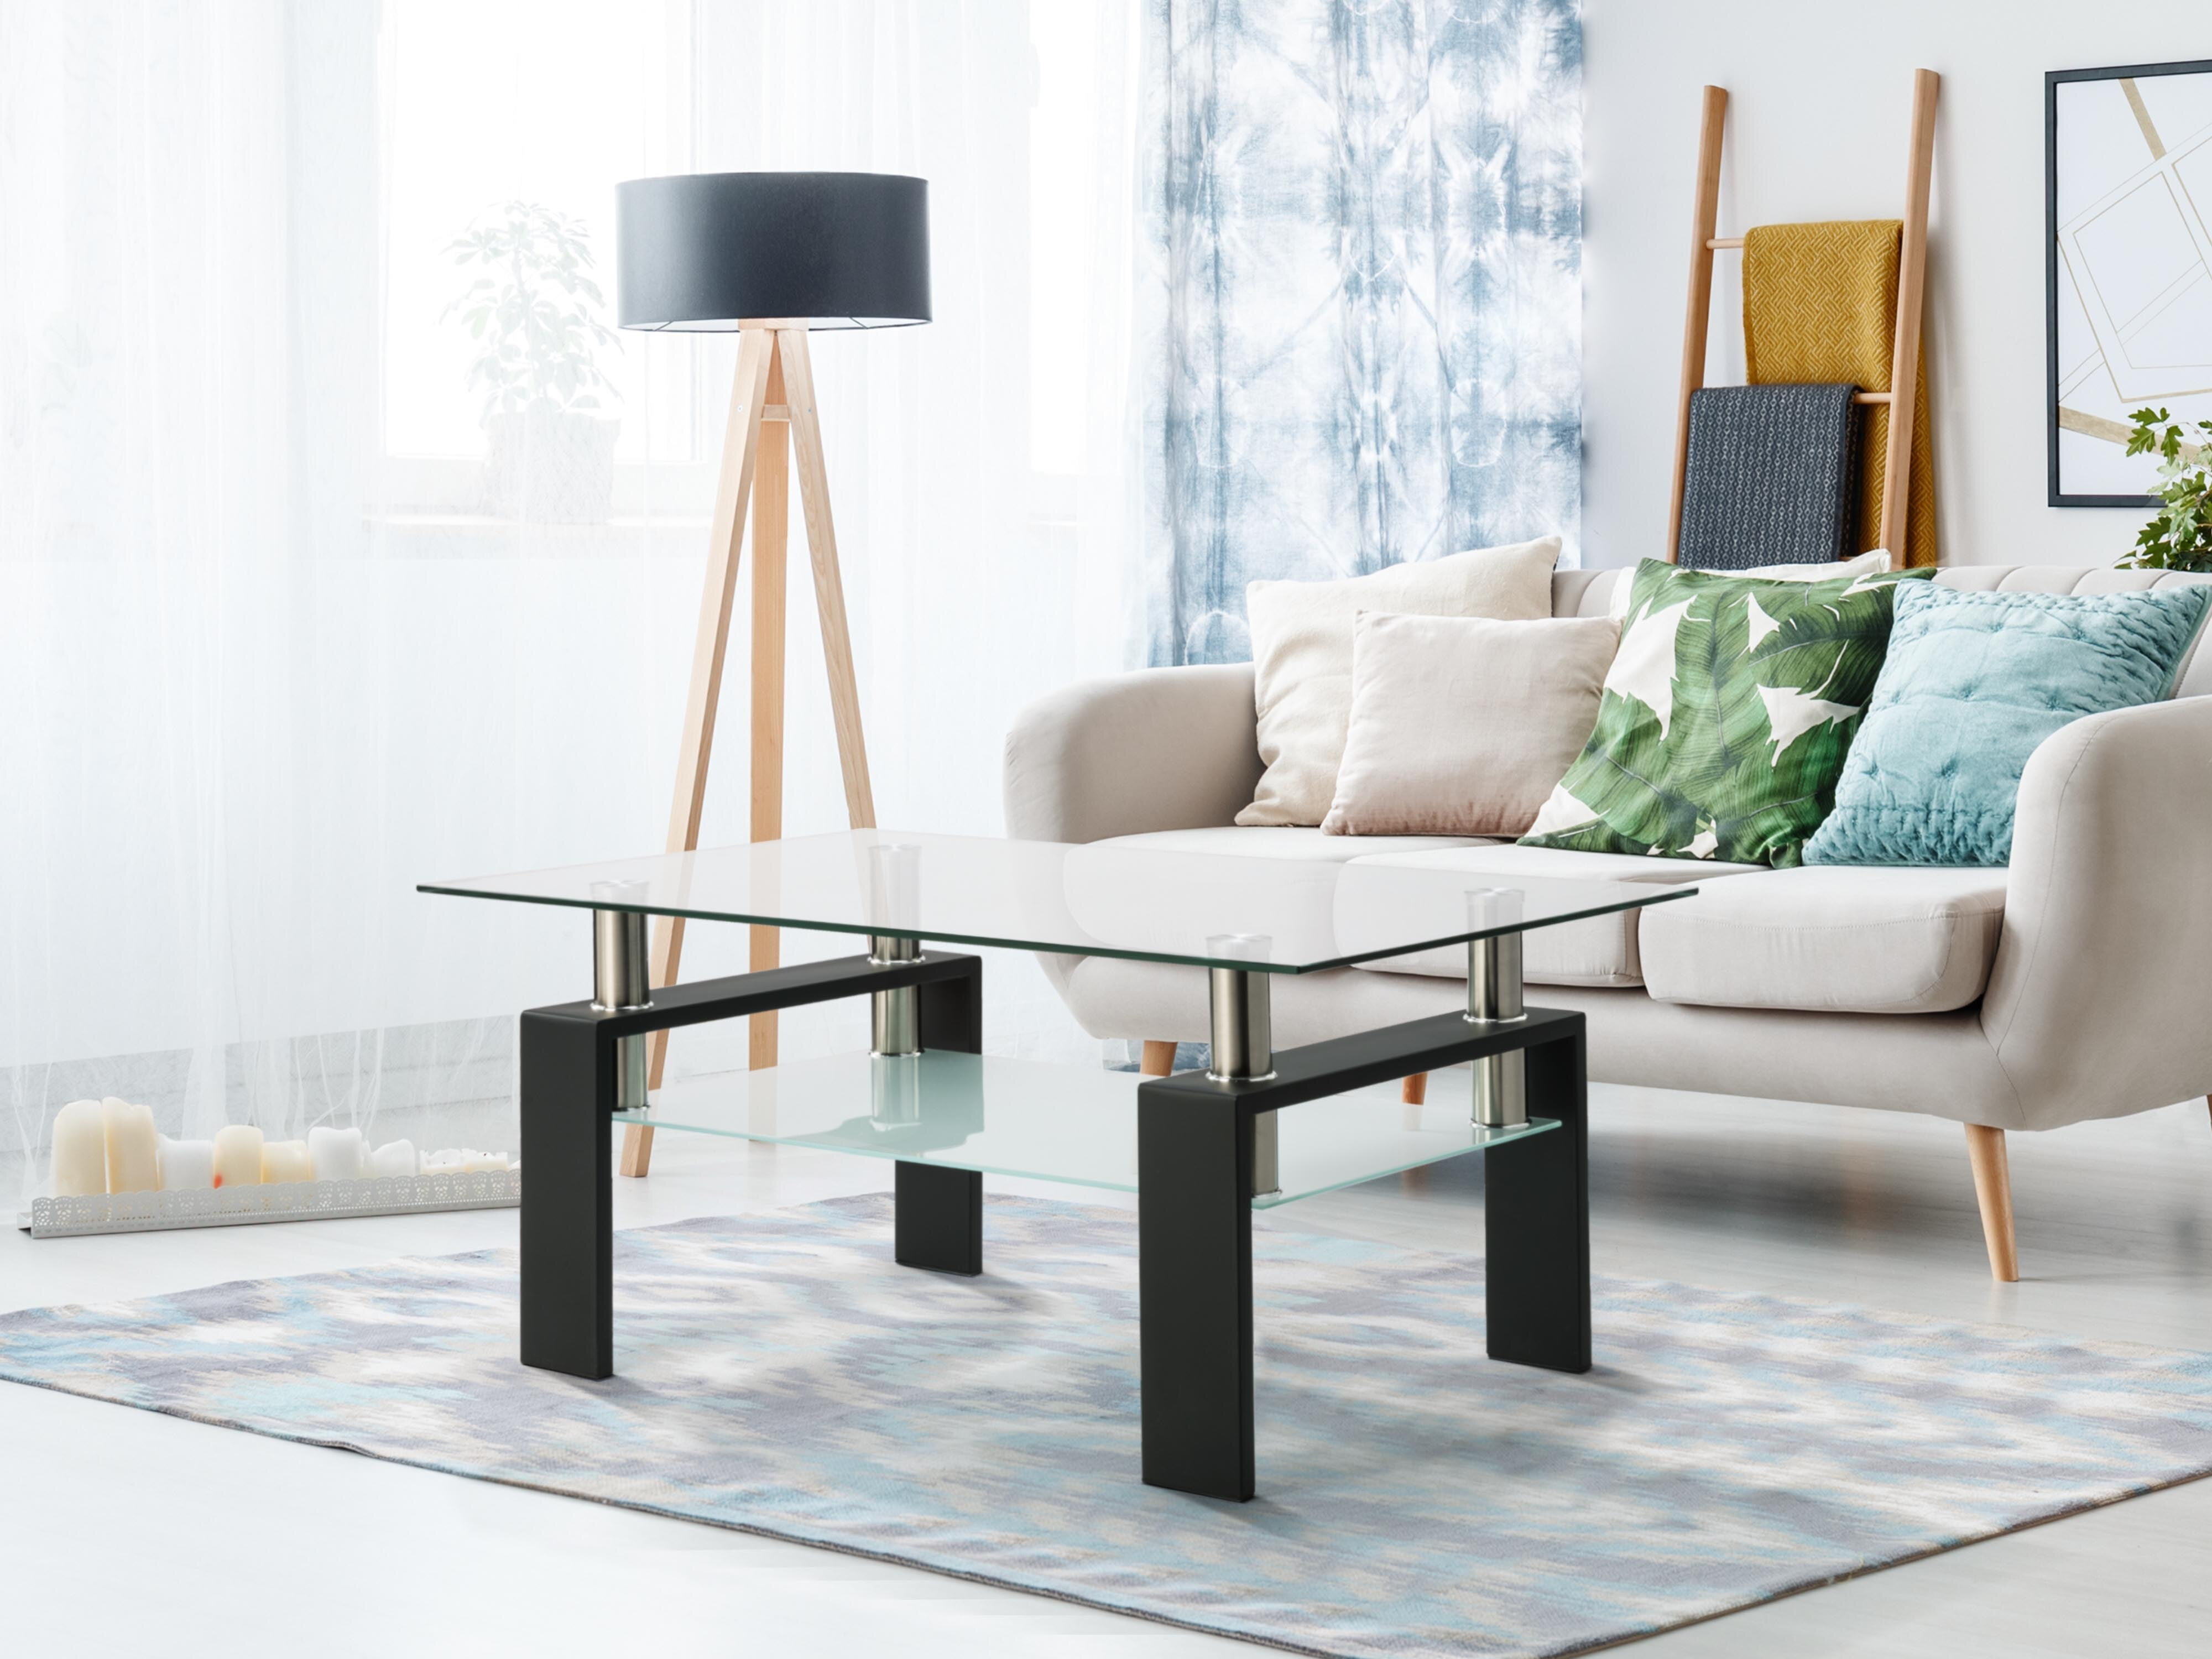 Clear Rectangle Glass Coffee Table with Lower Shelf,ModernTable with ...